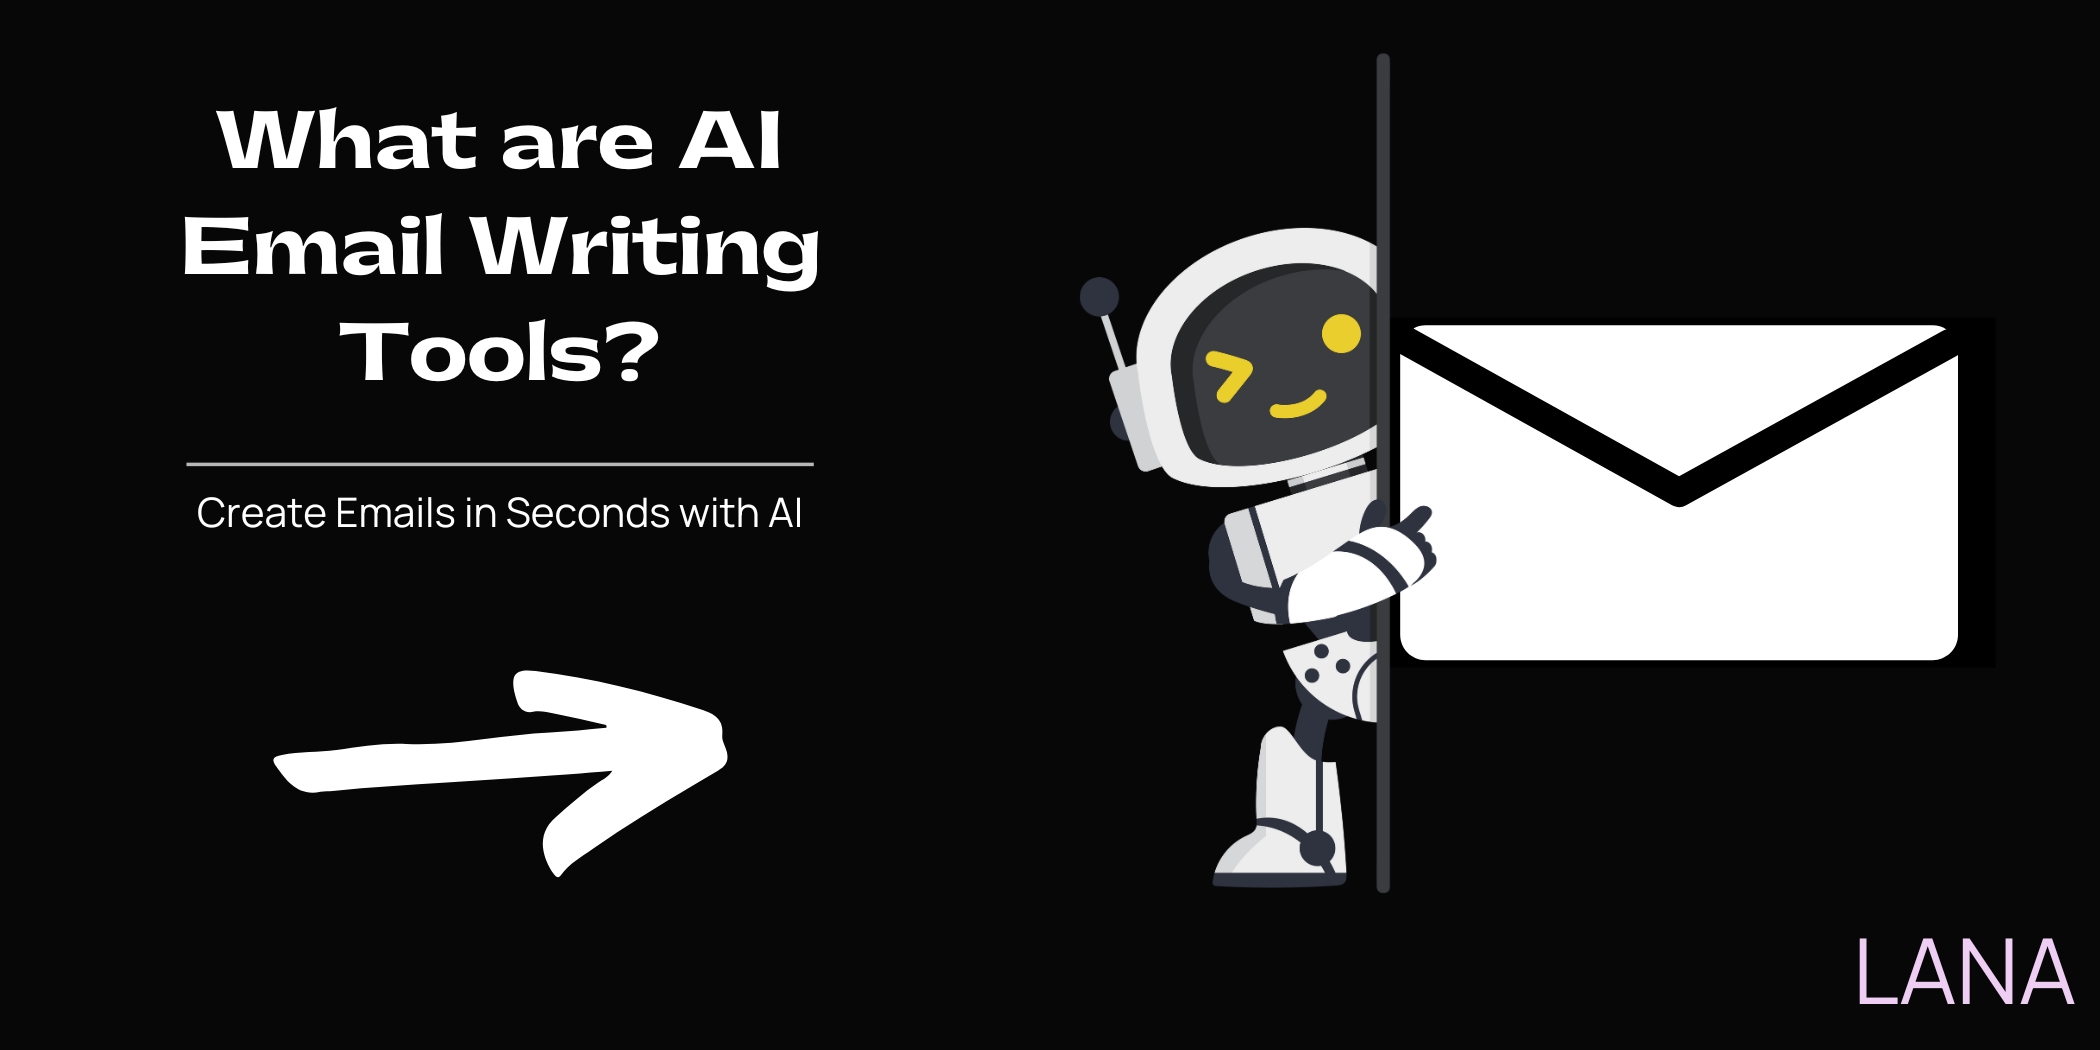 What are AI Email Writing Tools